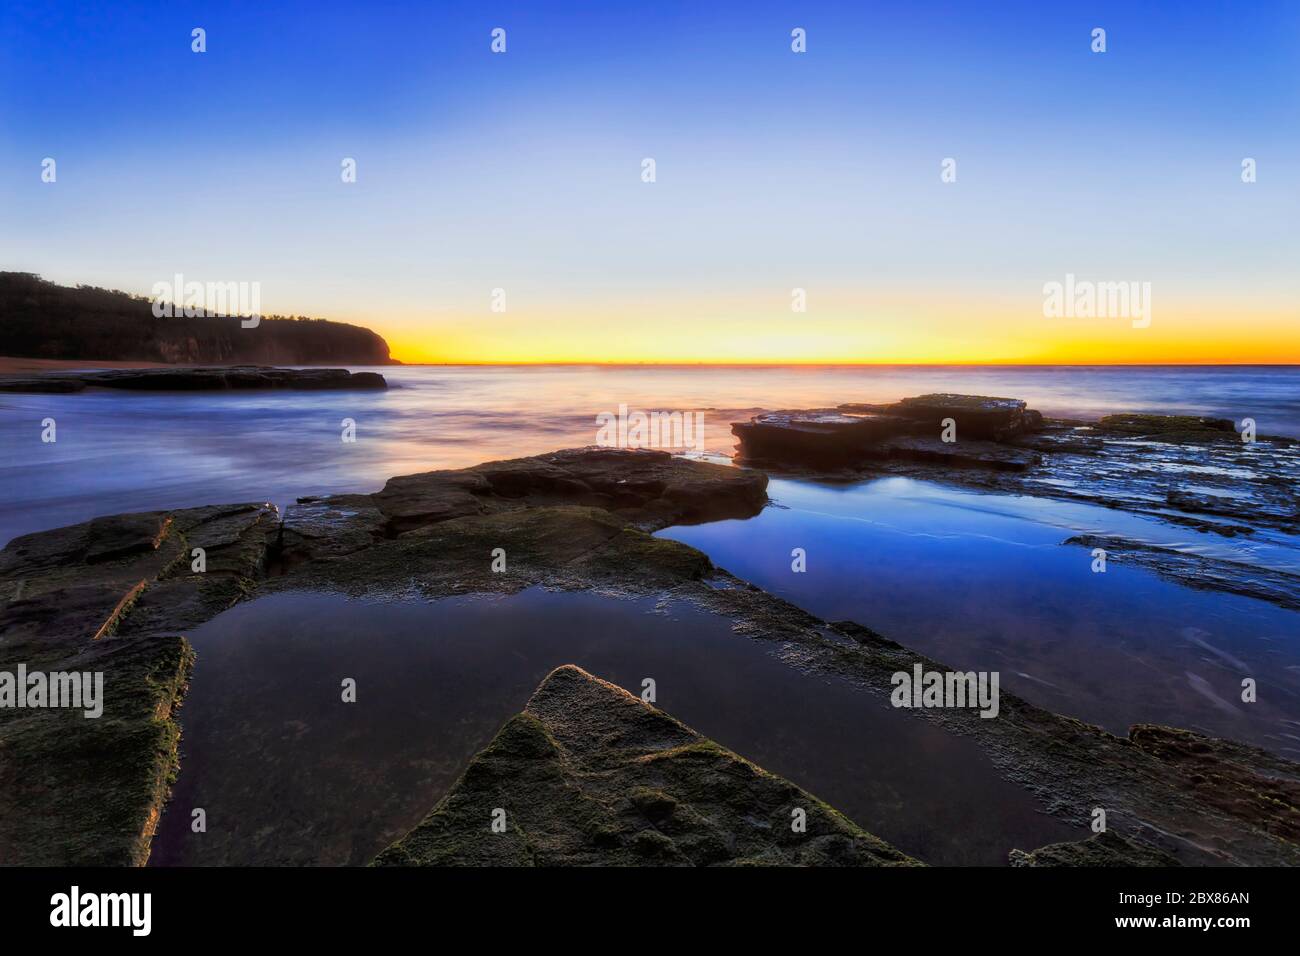 Seaweed covered sandstone plateau at Sydney Northern beach at sunrise facing Pacific ocean horizon. Stock Photo